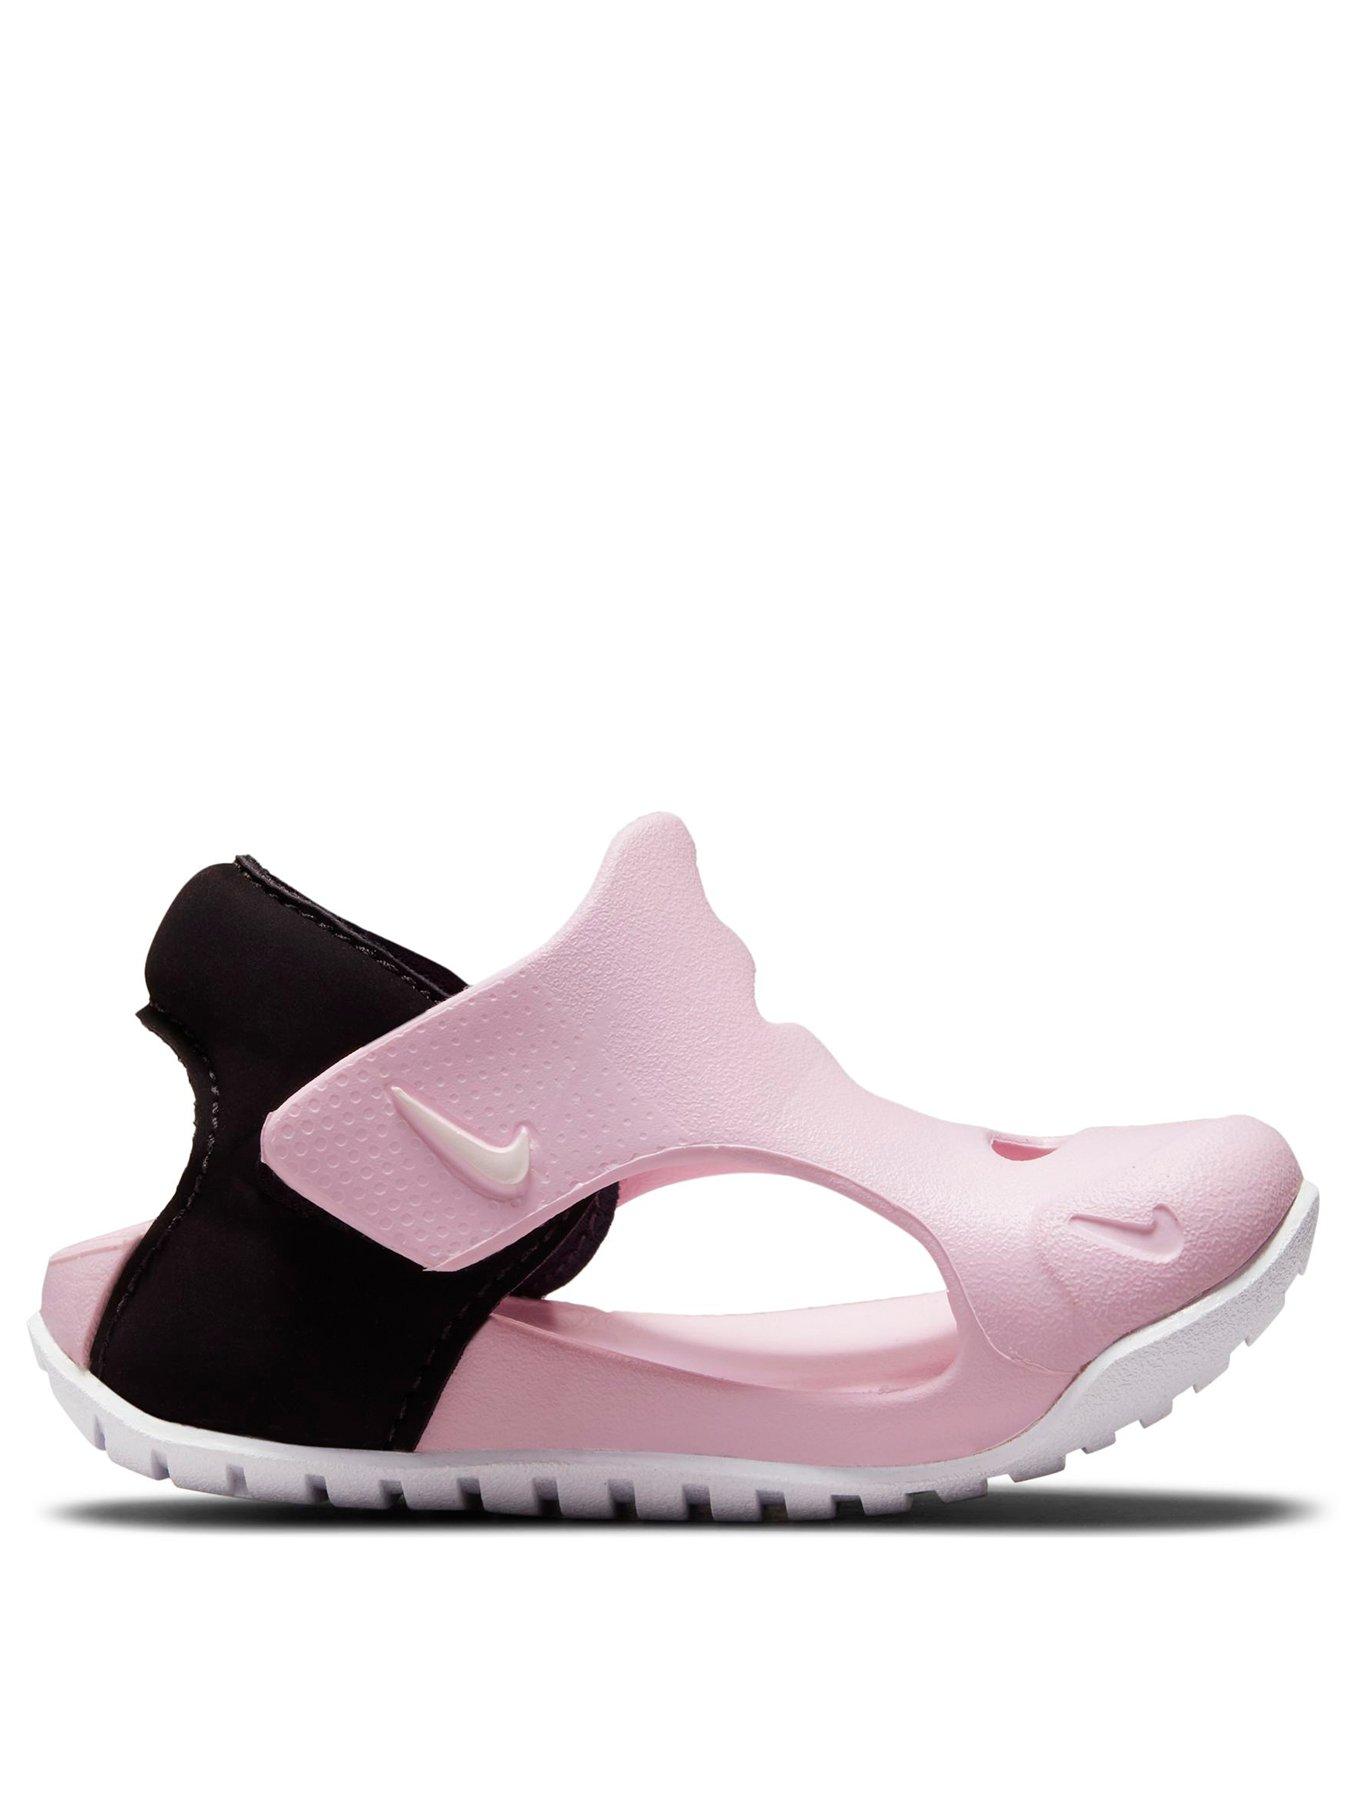 Shoes & boots Sunray Protect 3 - Pink/White